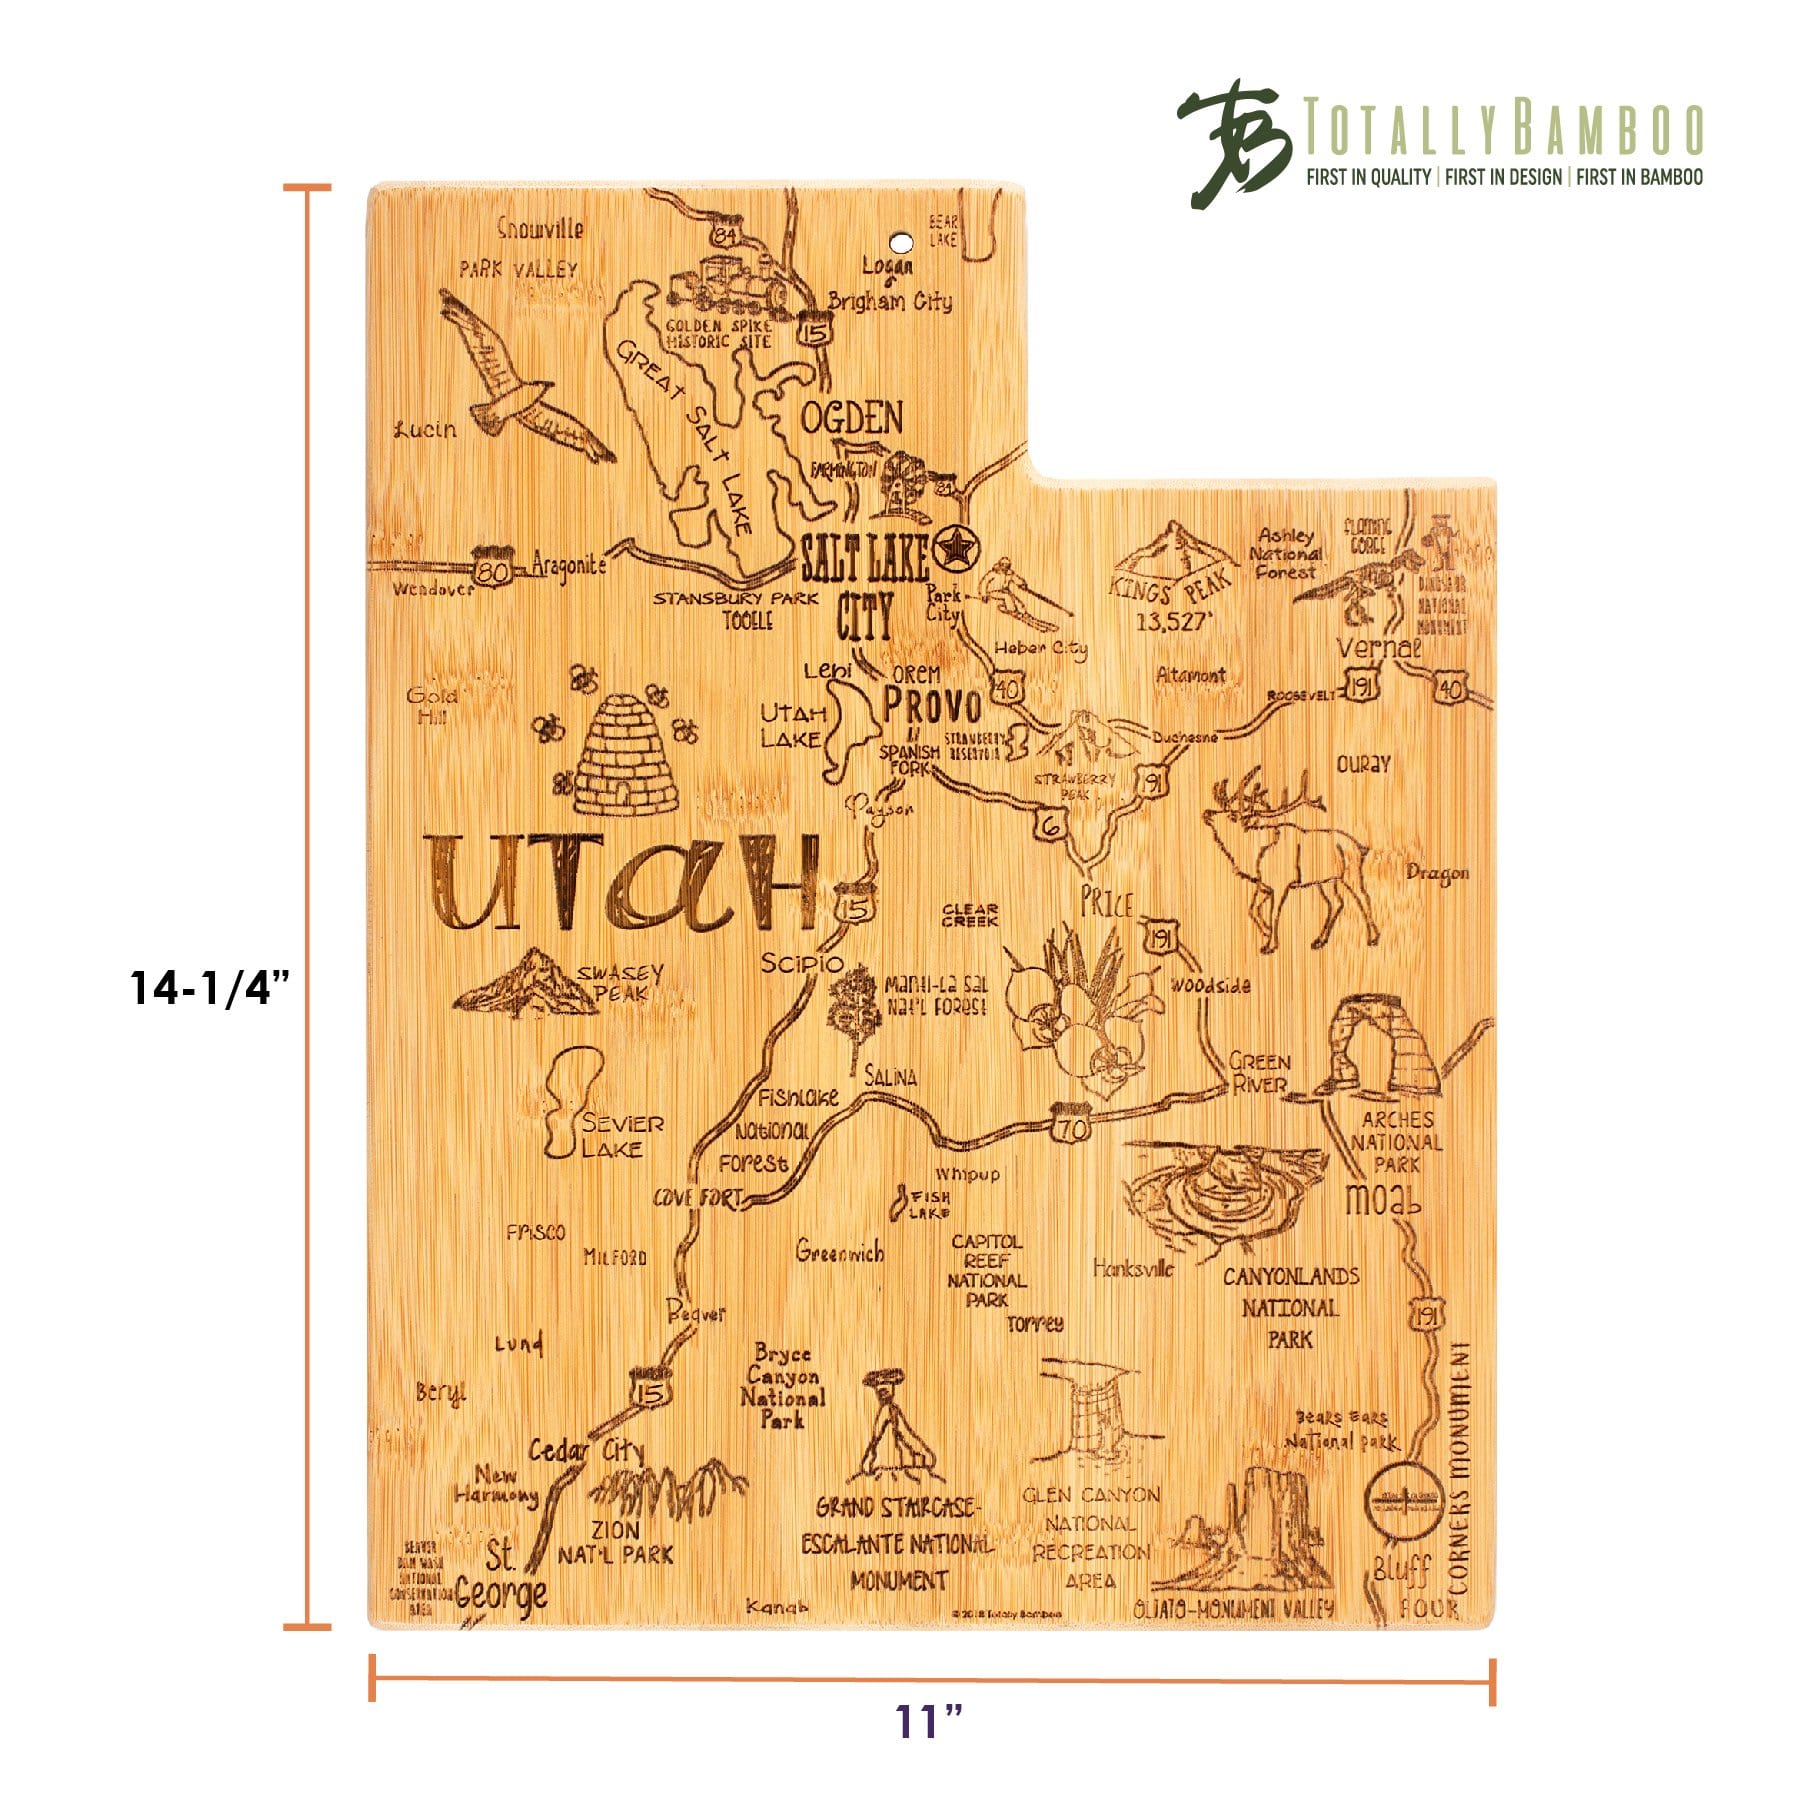 Totally Bamboo Destination Utah State Shaped Bamboo Serving and Cutting Board